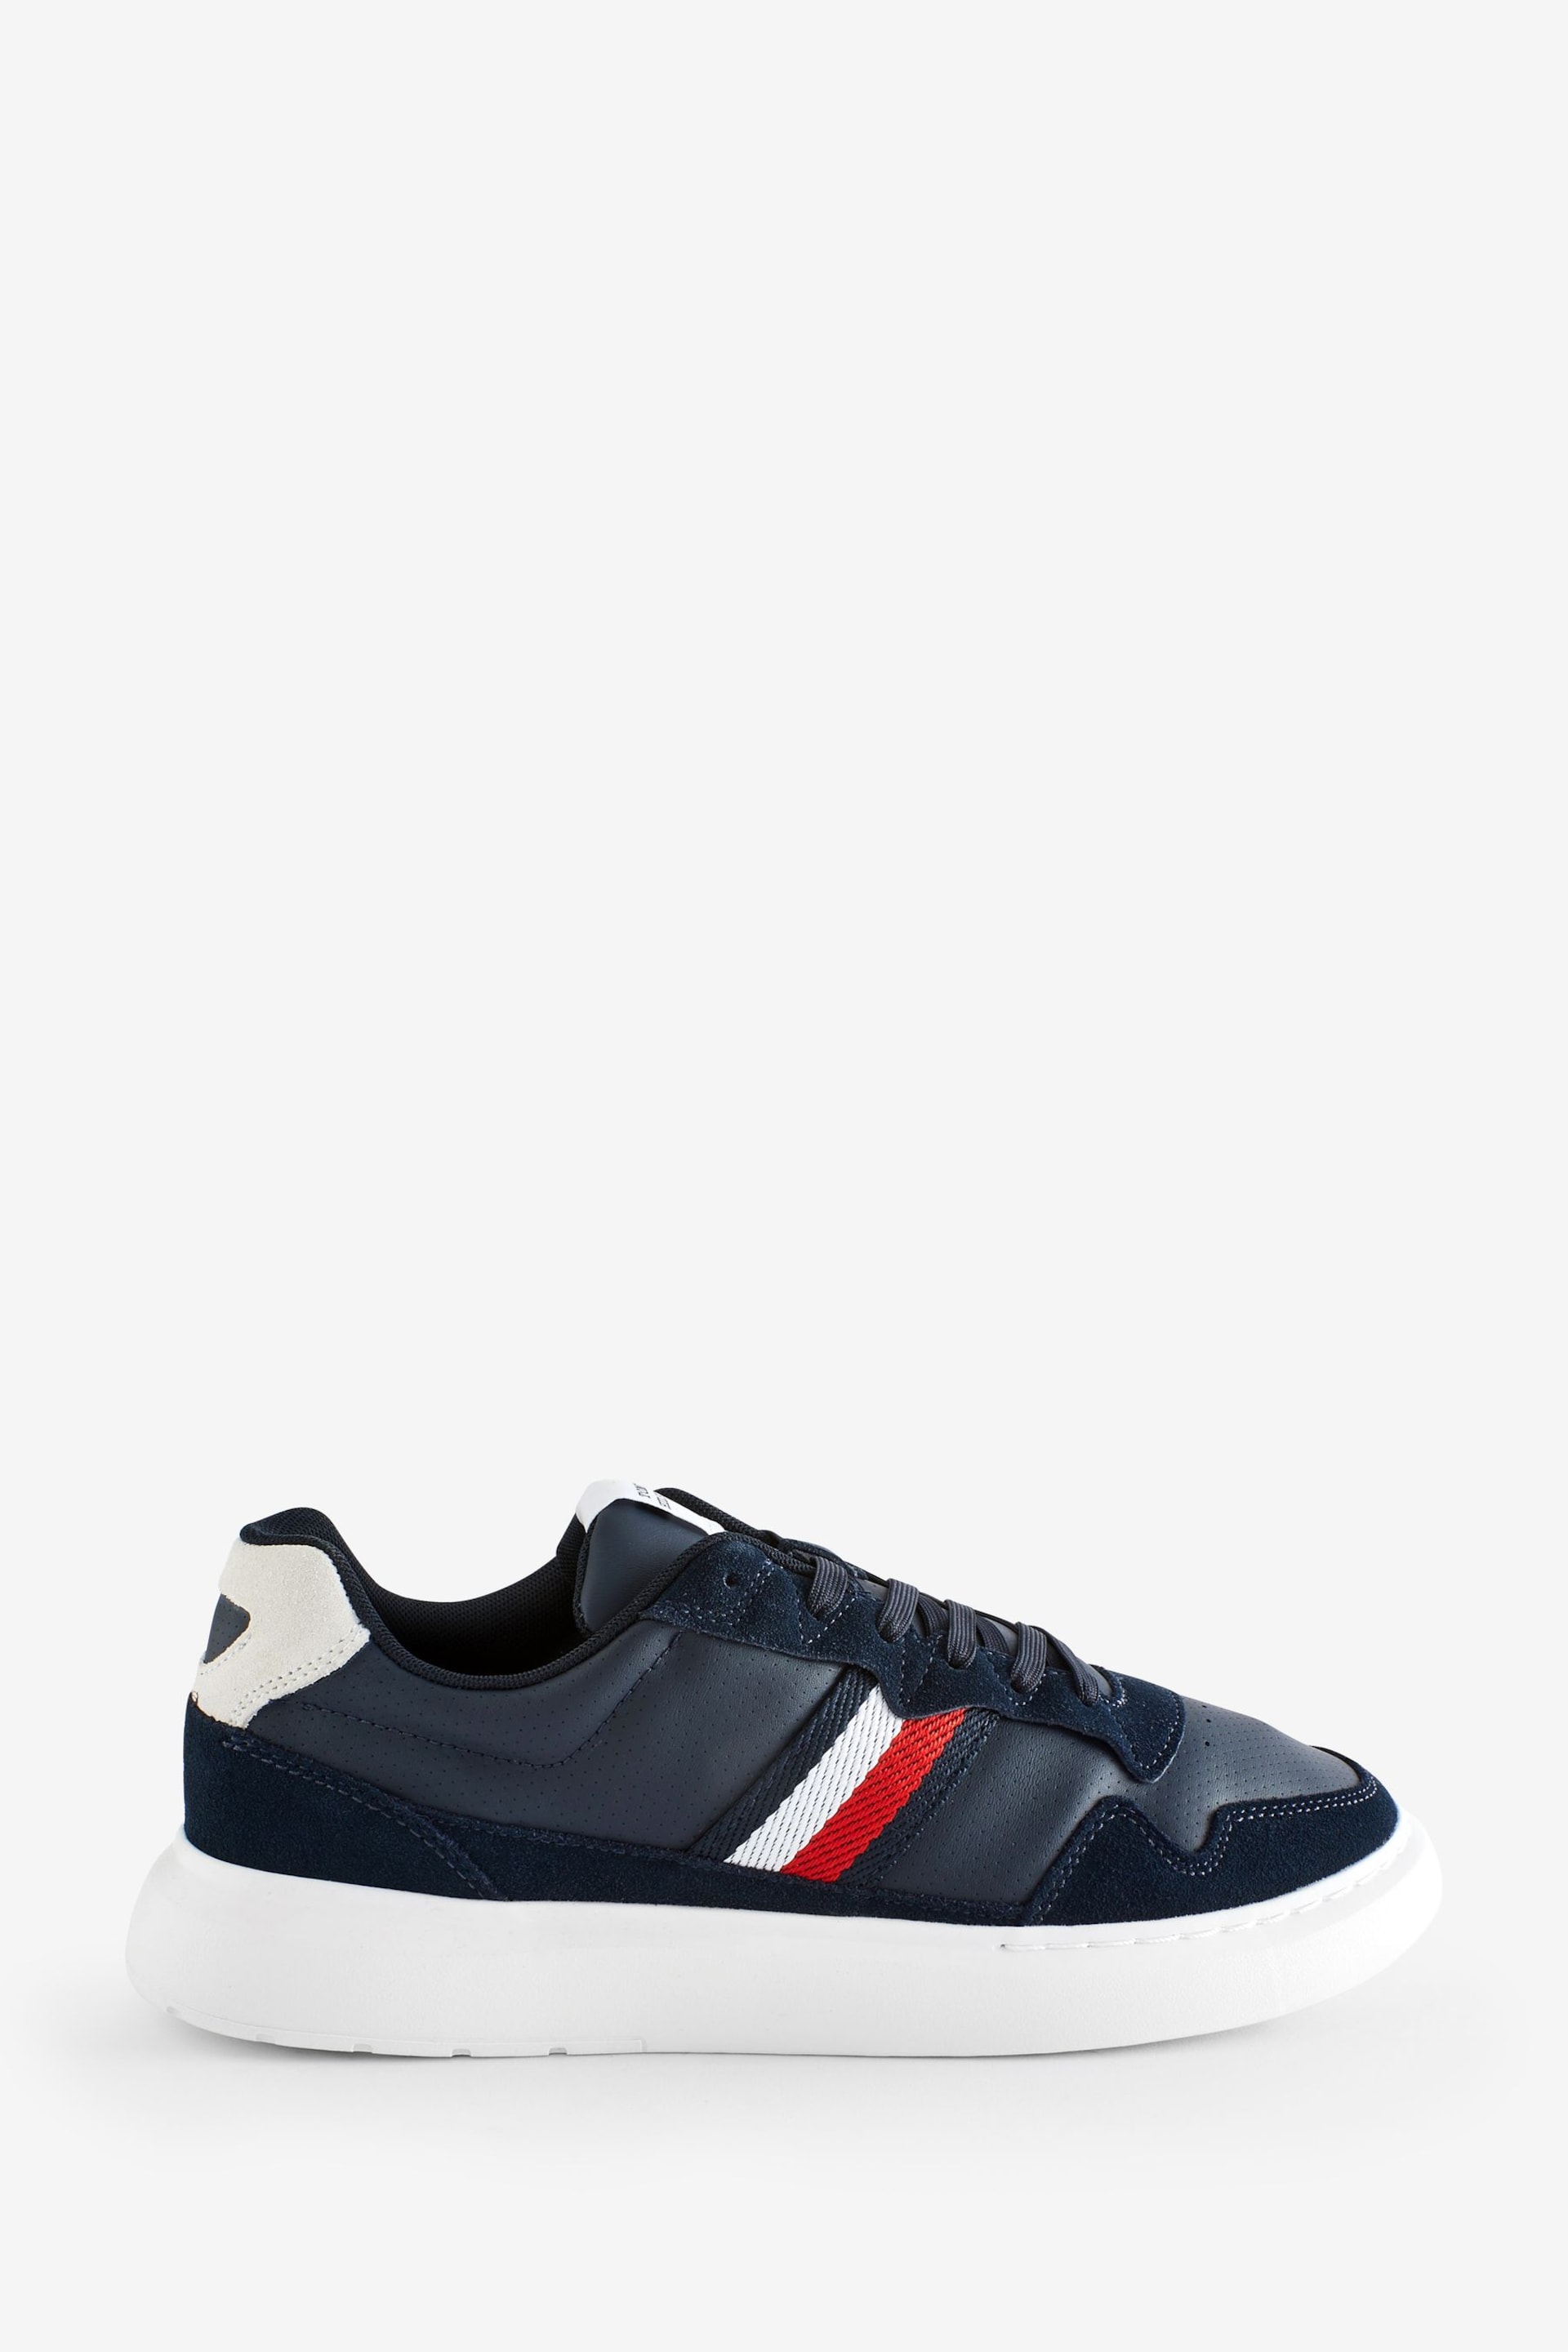 Tommy Hilfiger Blue Mix Stripes Sneakers - Image 1 of 4